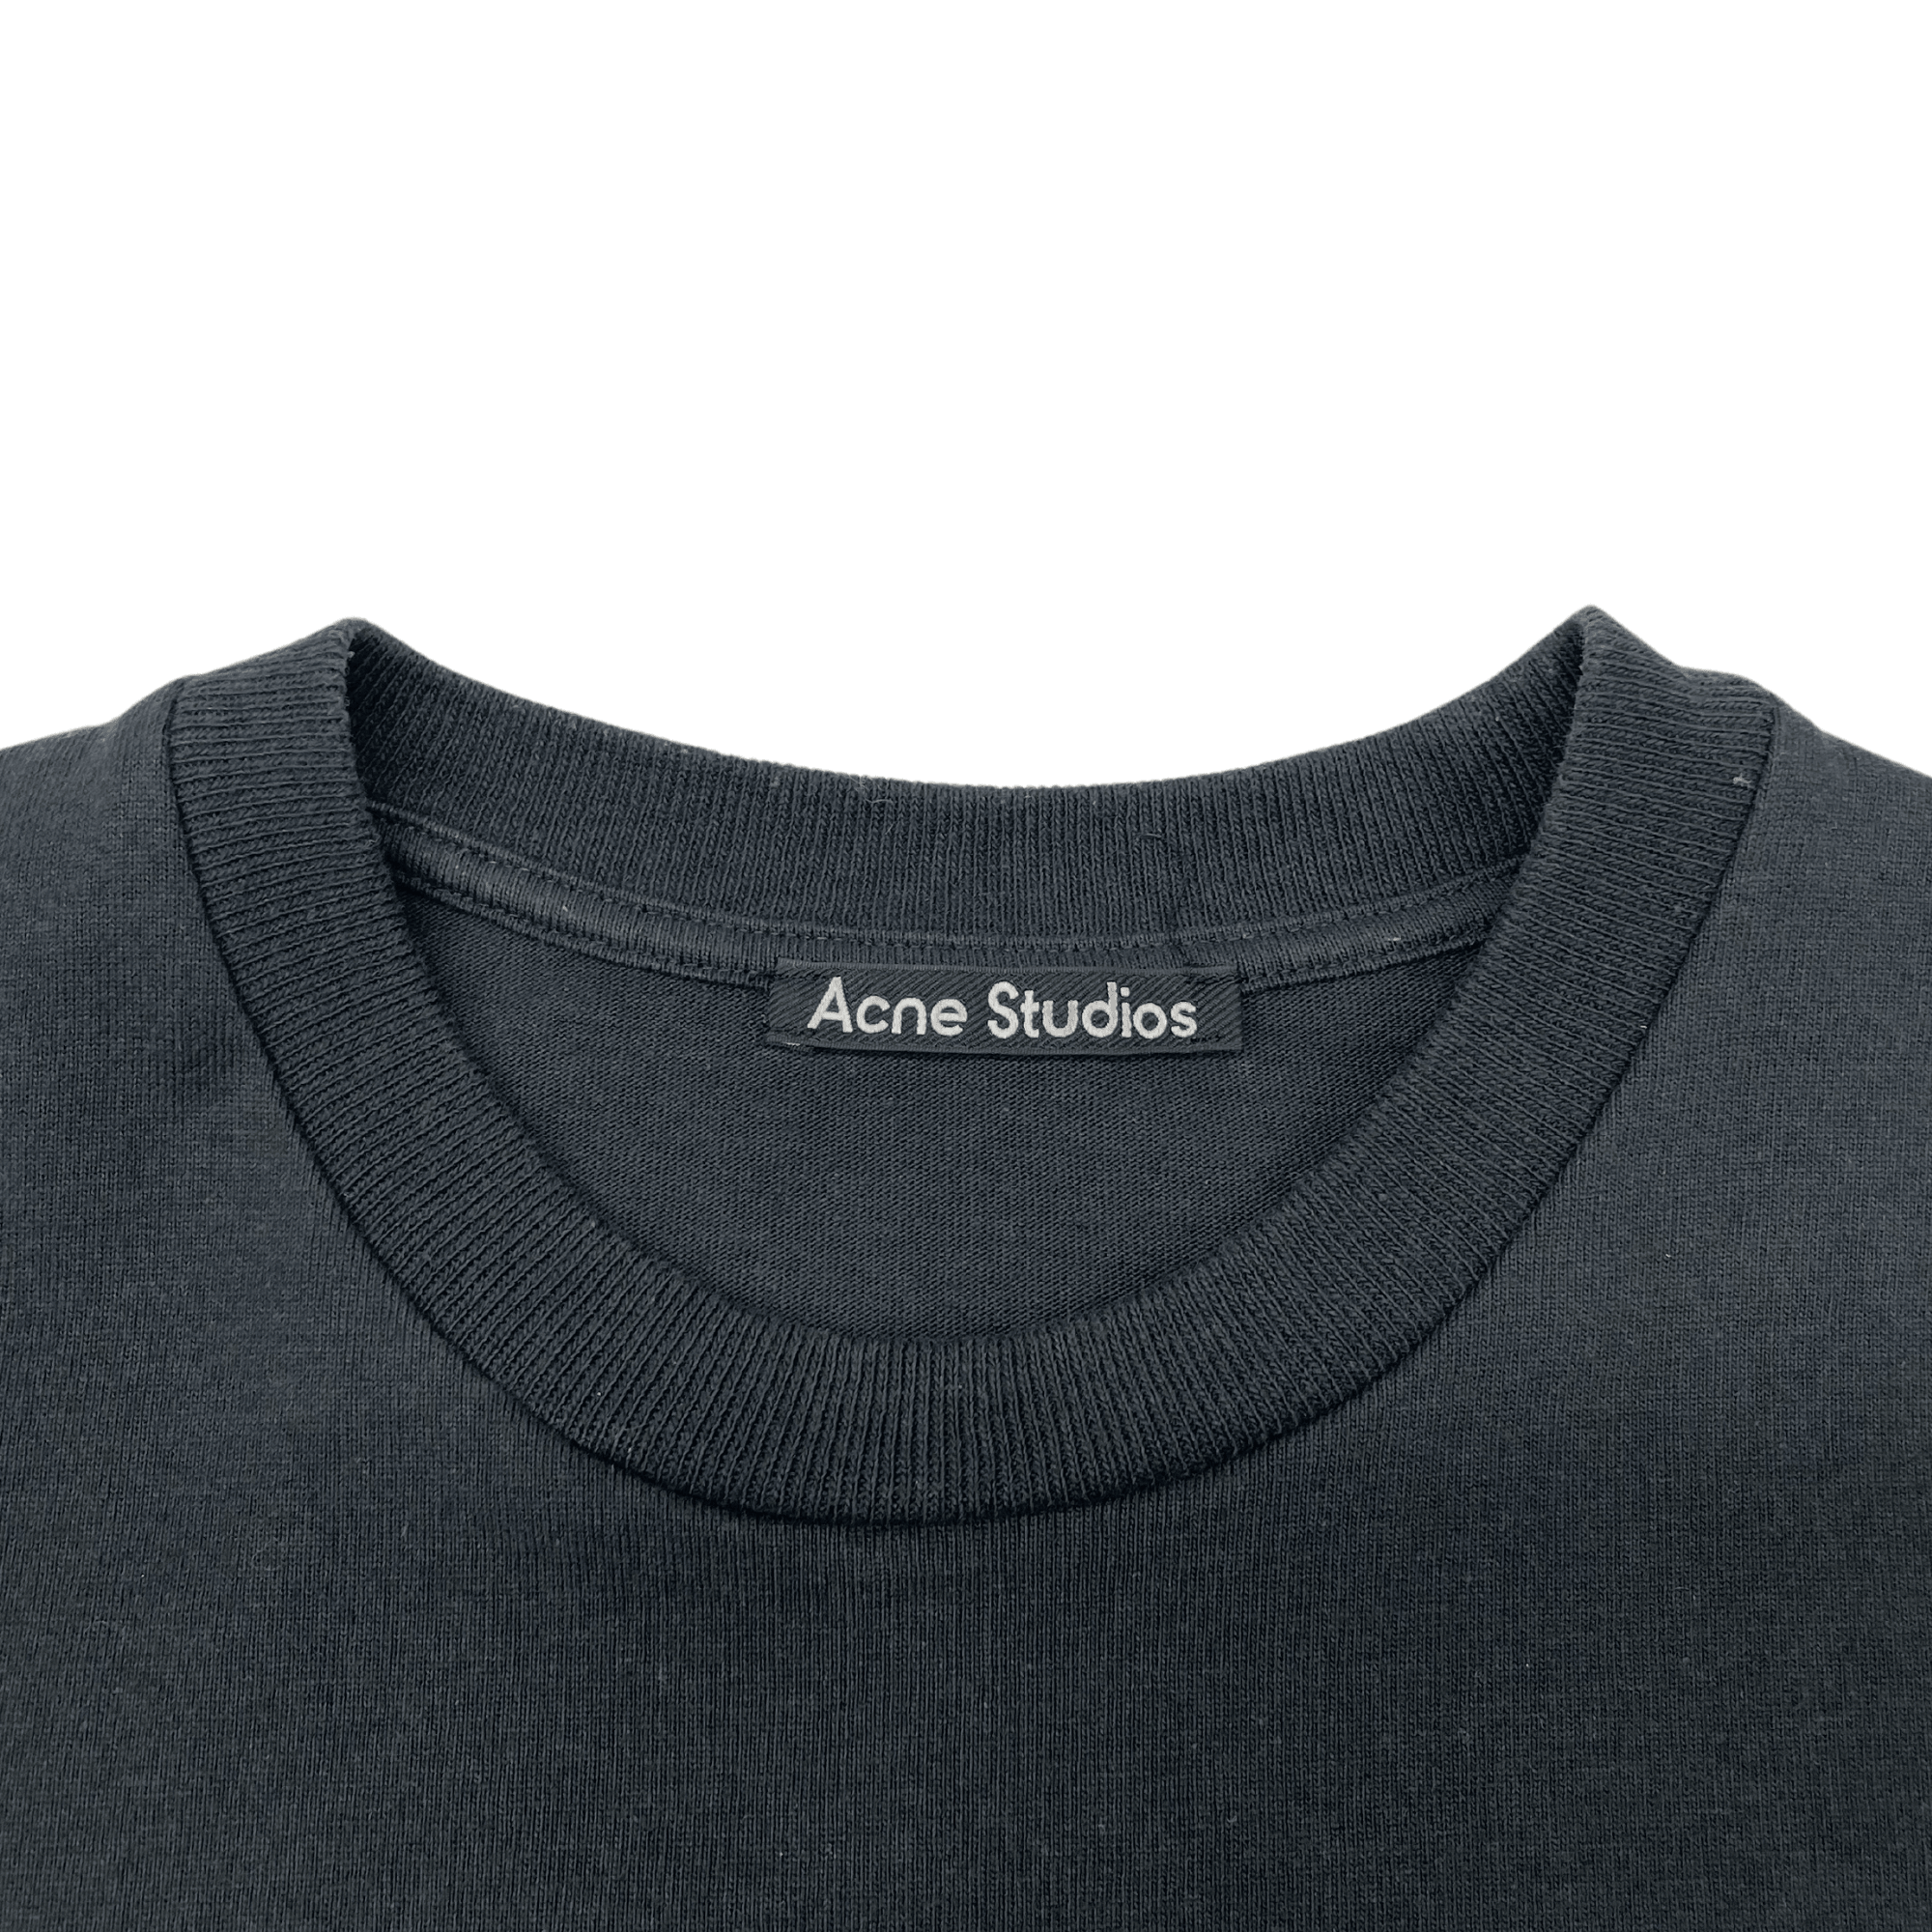 Acne Studios T-Shirt - Youth's 8 - Fashionably Yours